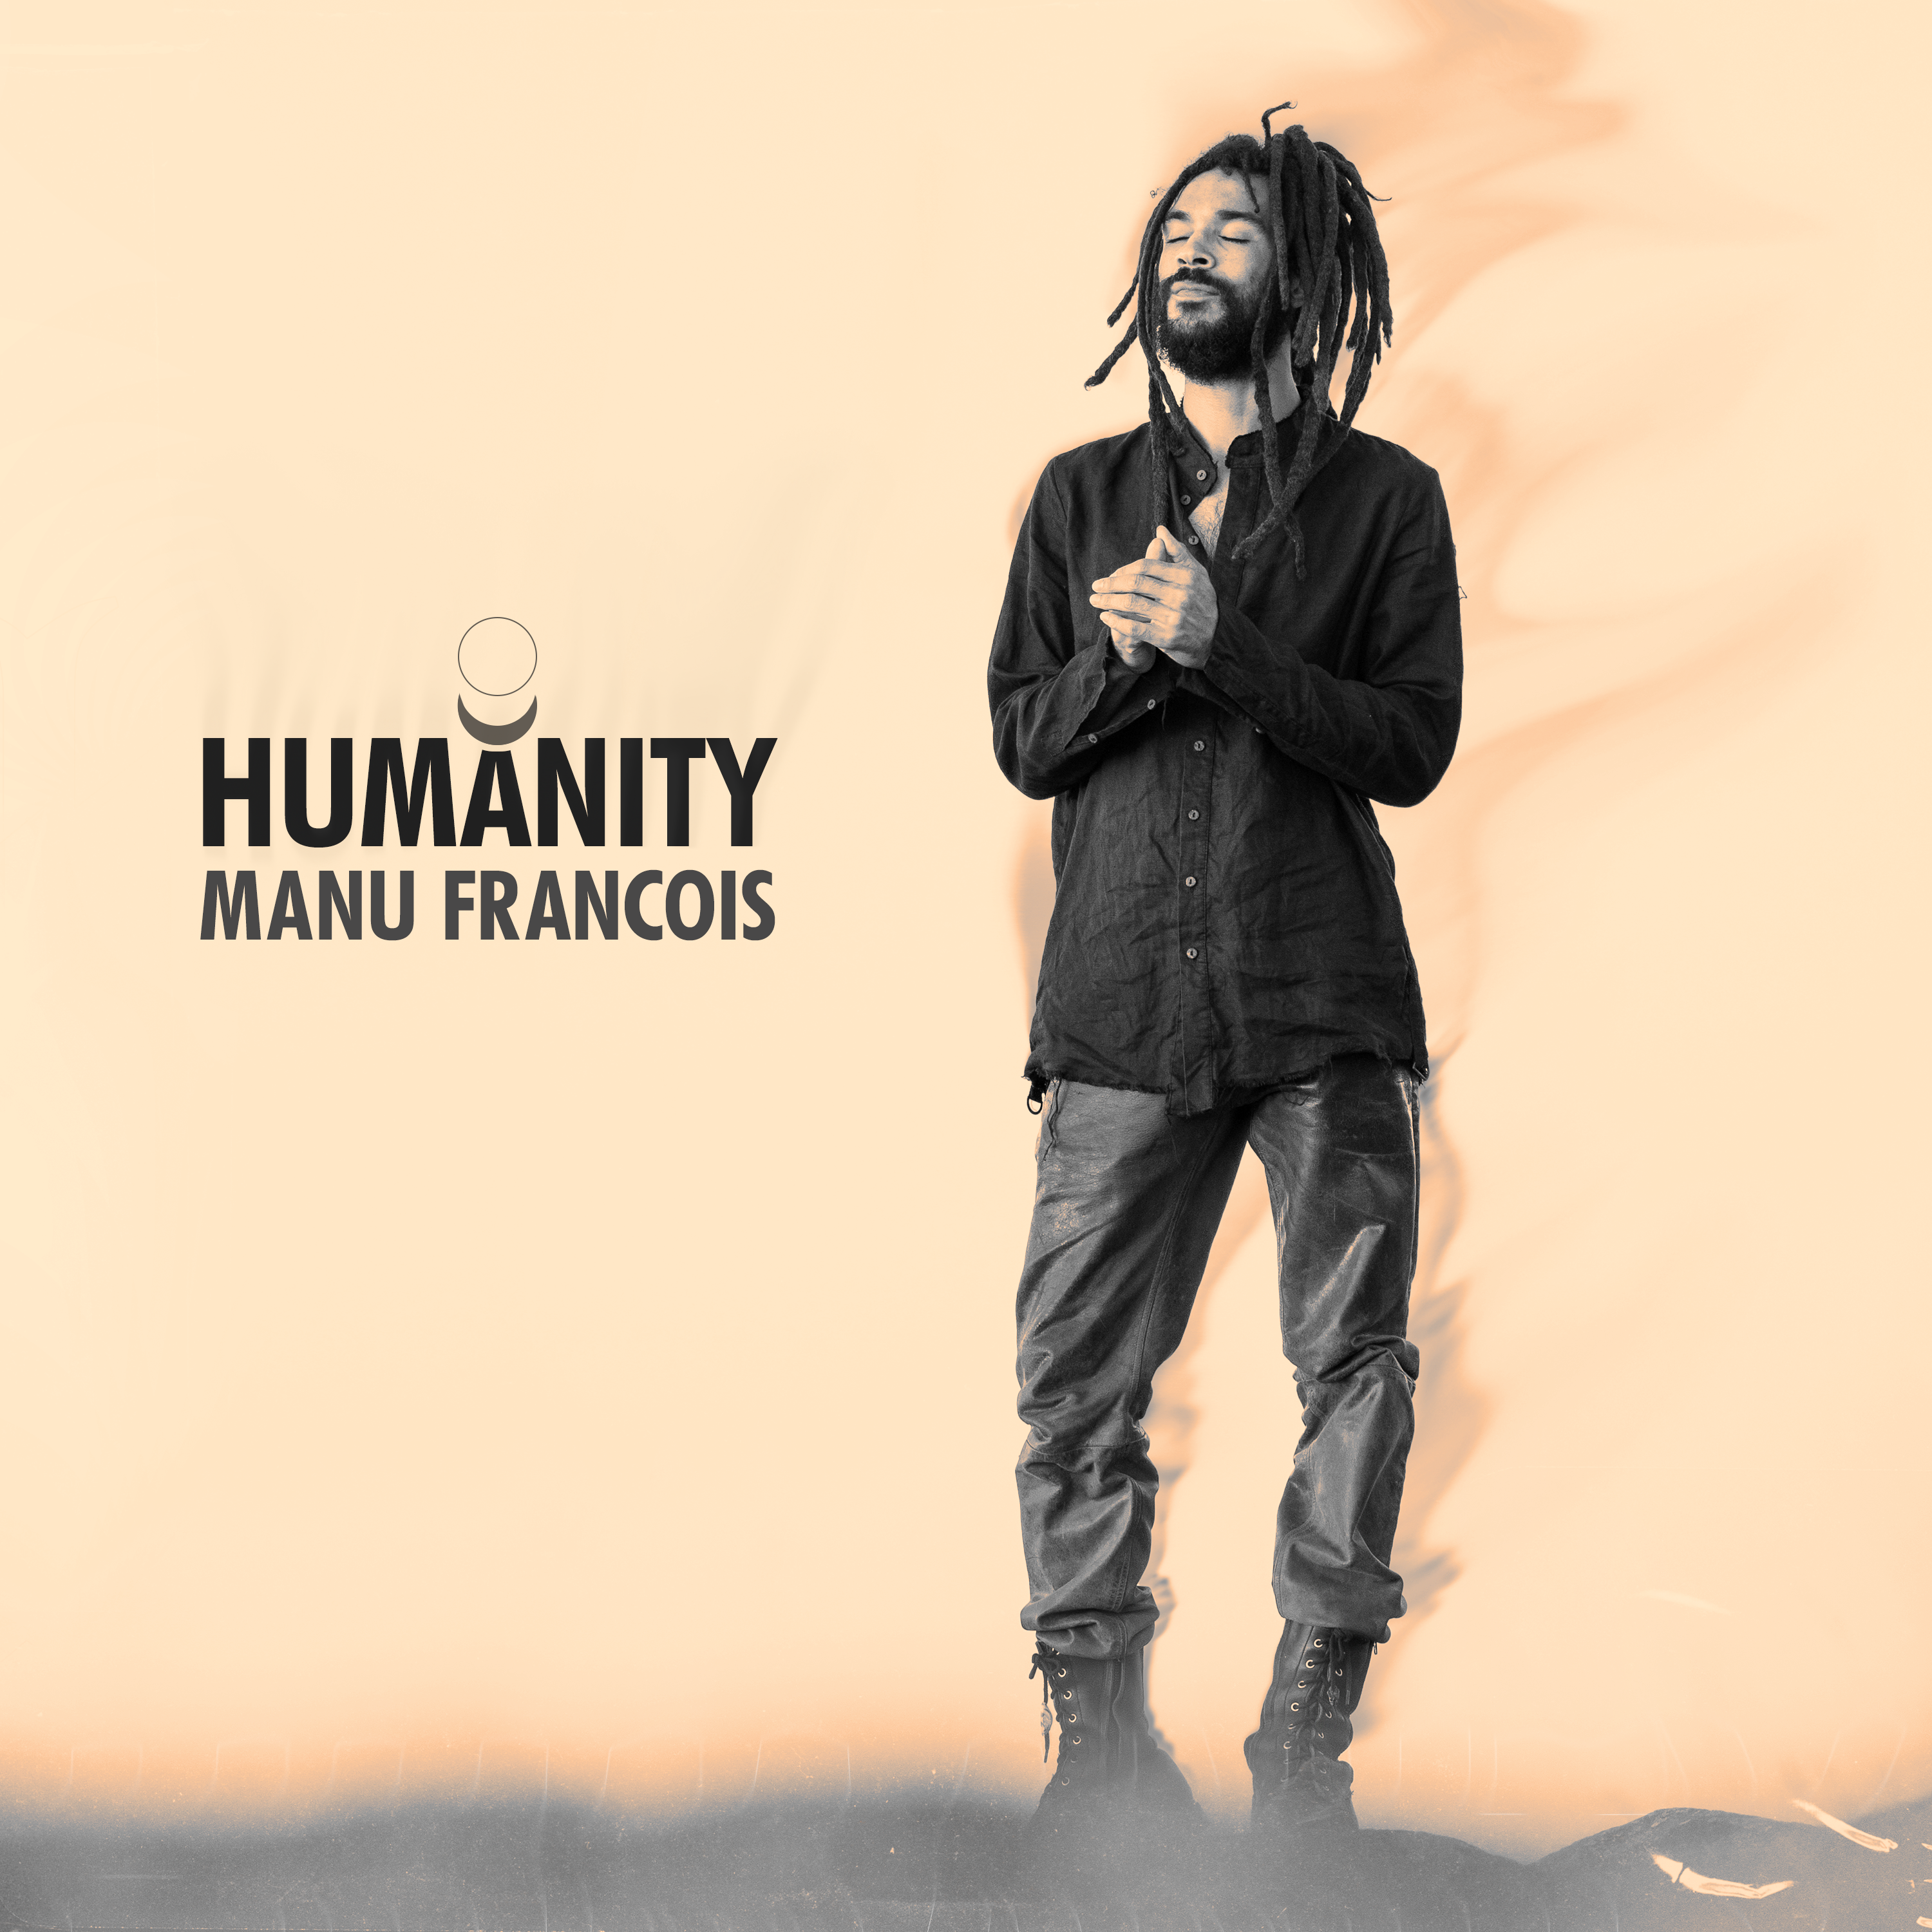 “This EP was written as a cathartic expression of realness in me” says ‘Manu Francois’ as he releases ‘Humanity’